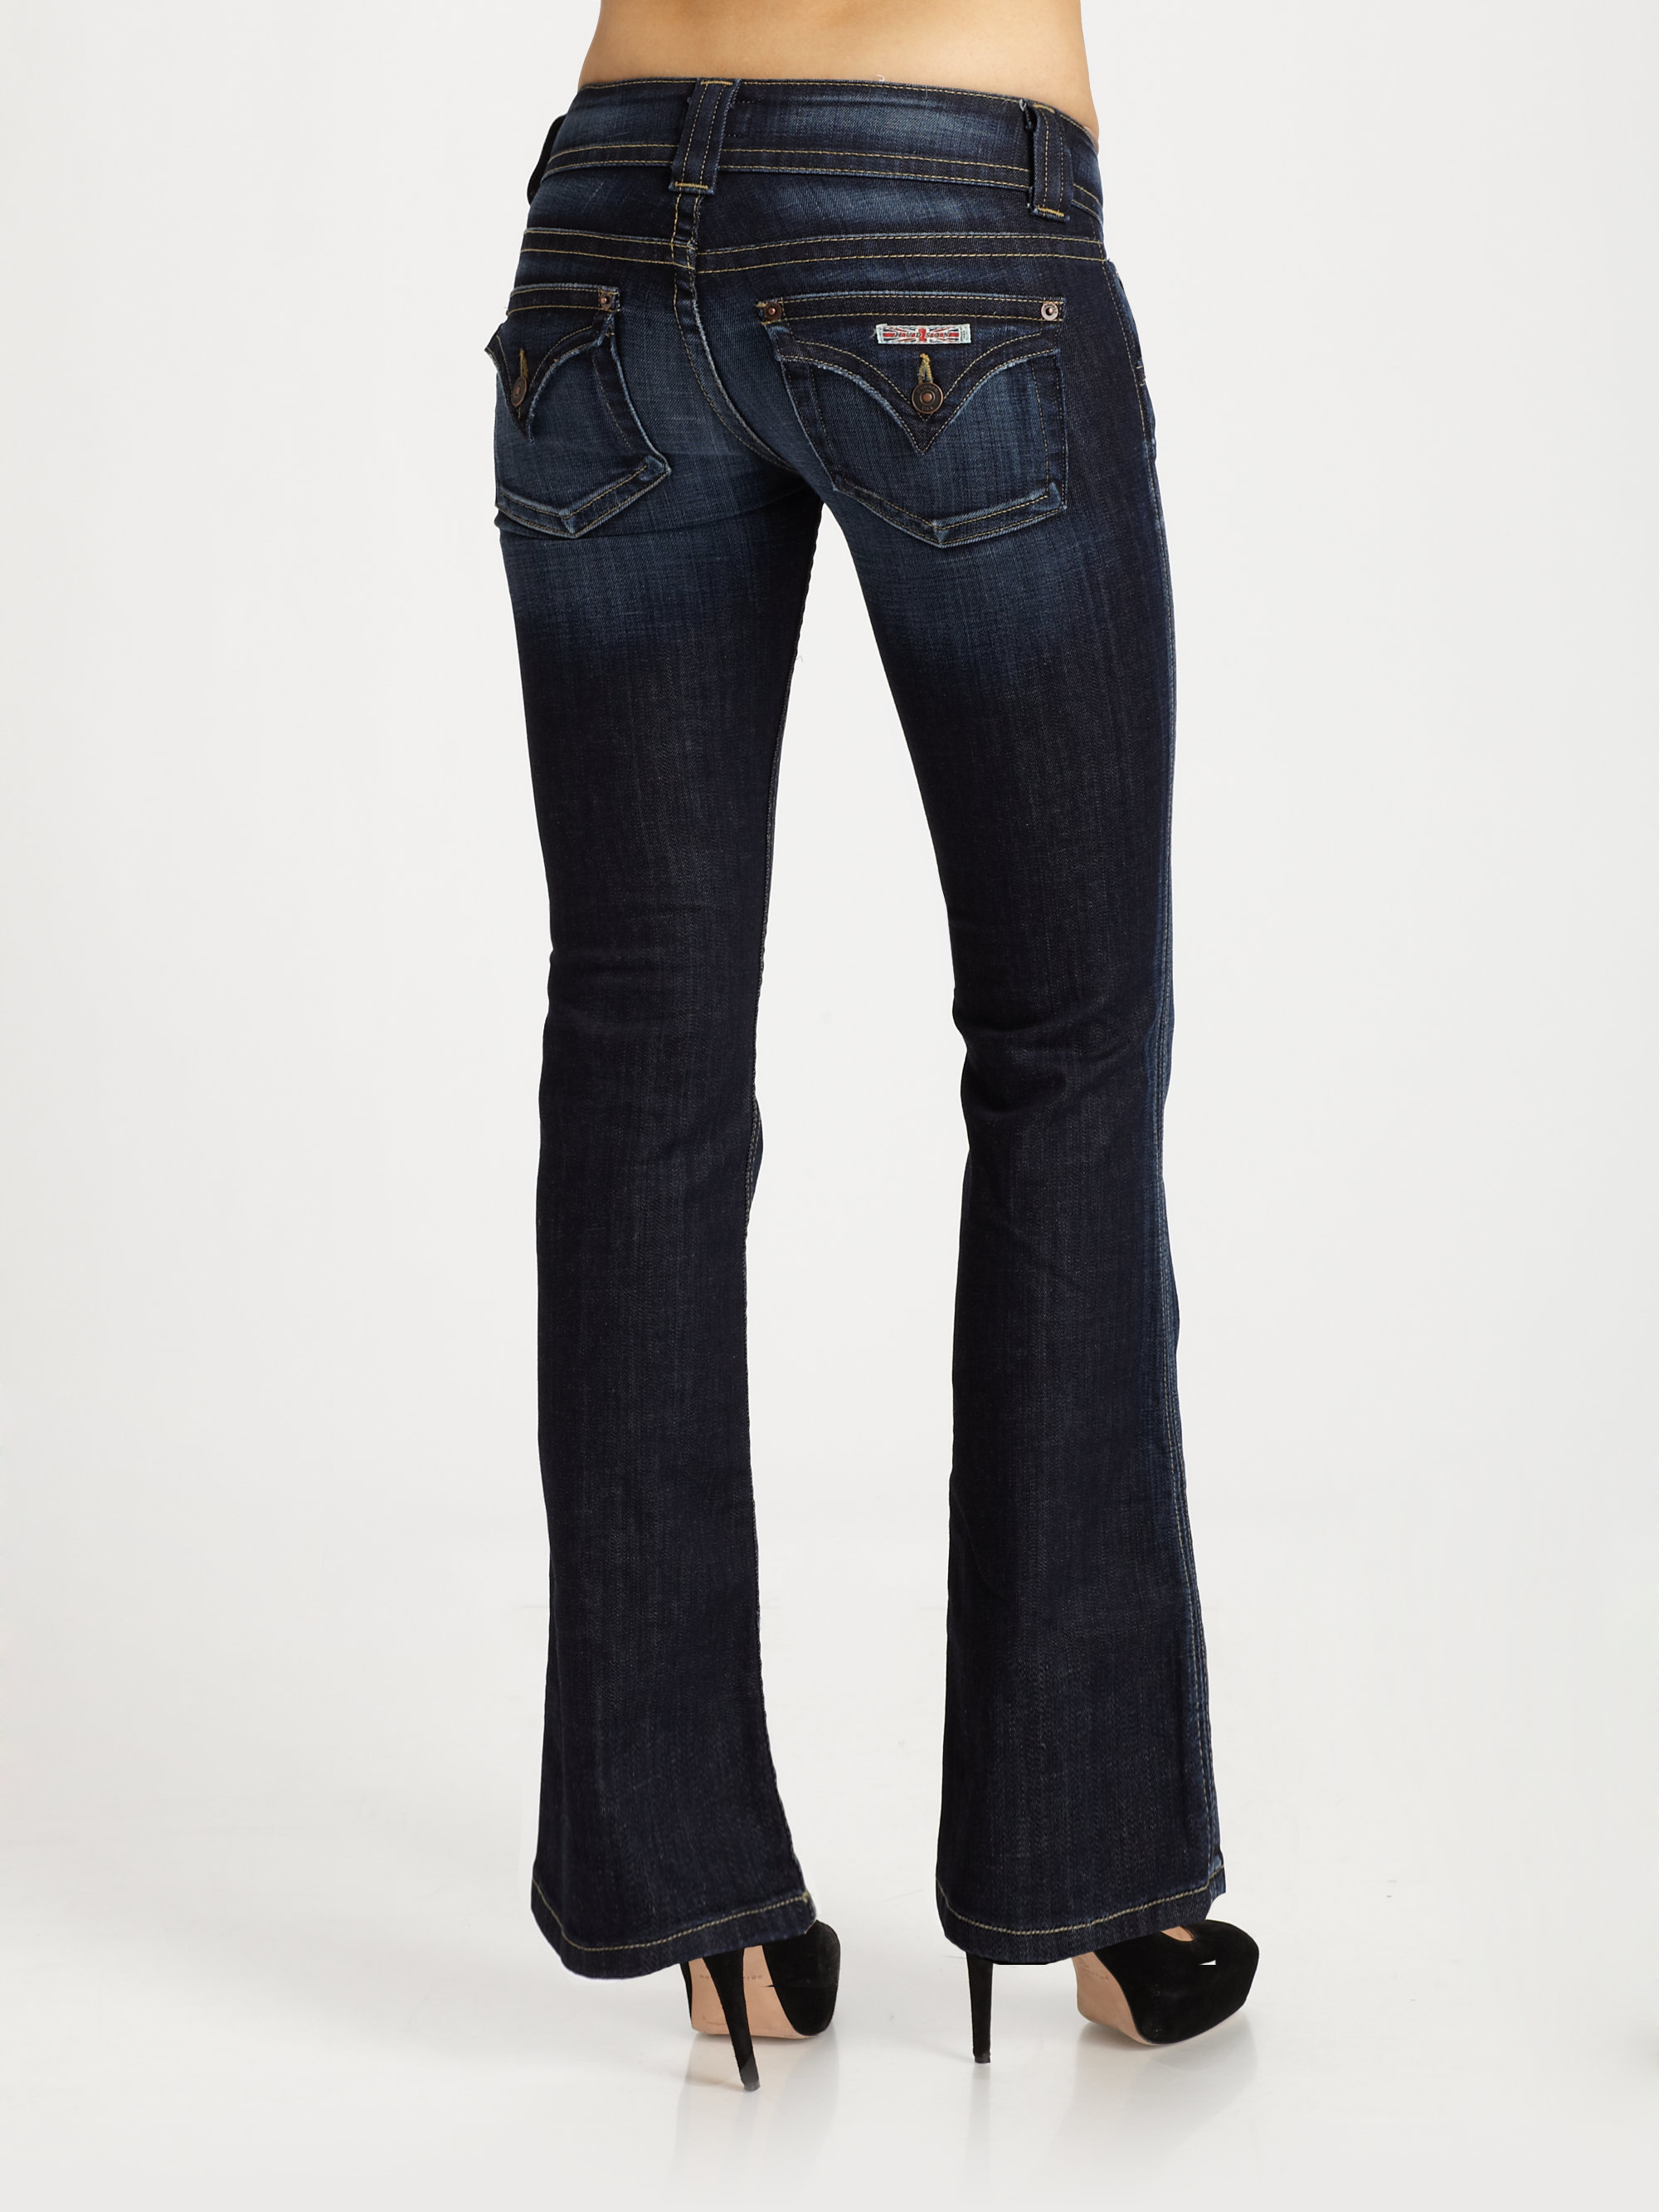 Hudson Jeans Petite Signature Bootcut Jeans in Blue | Lyst